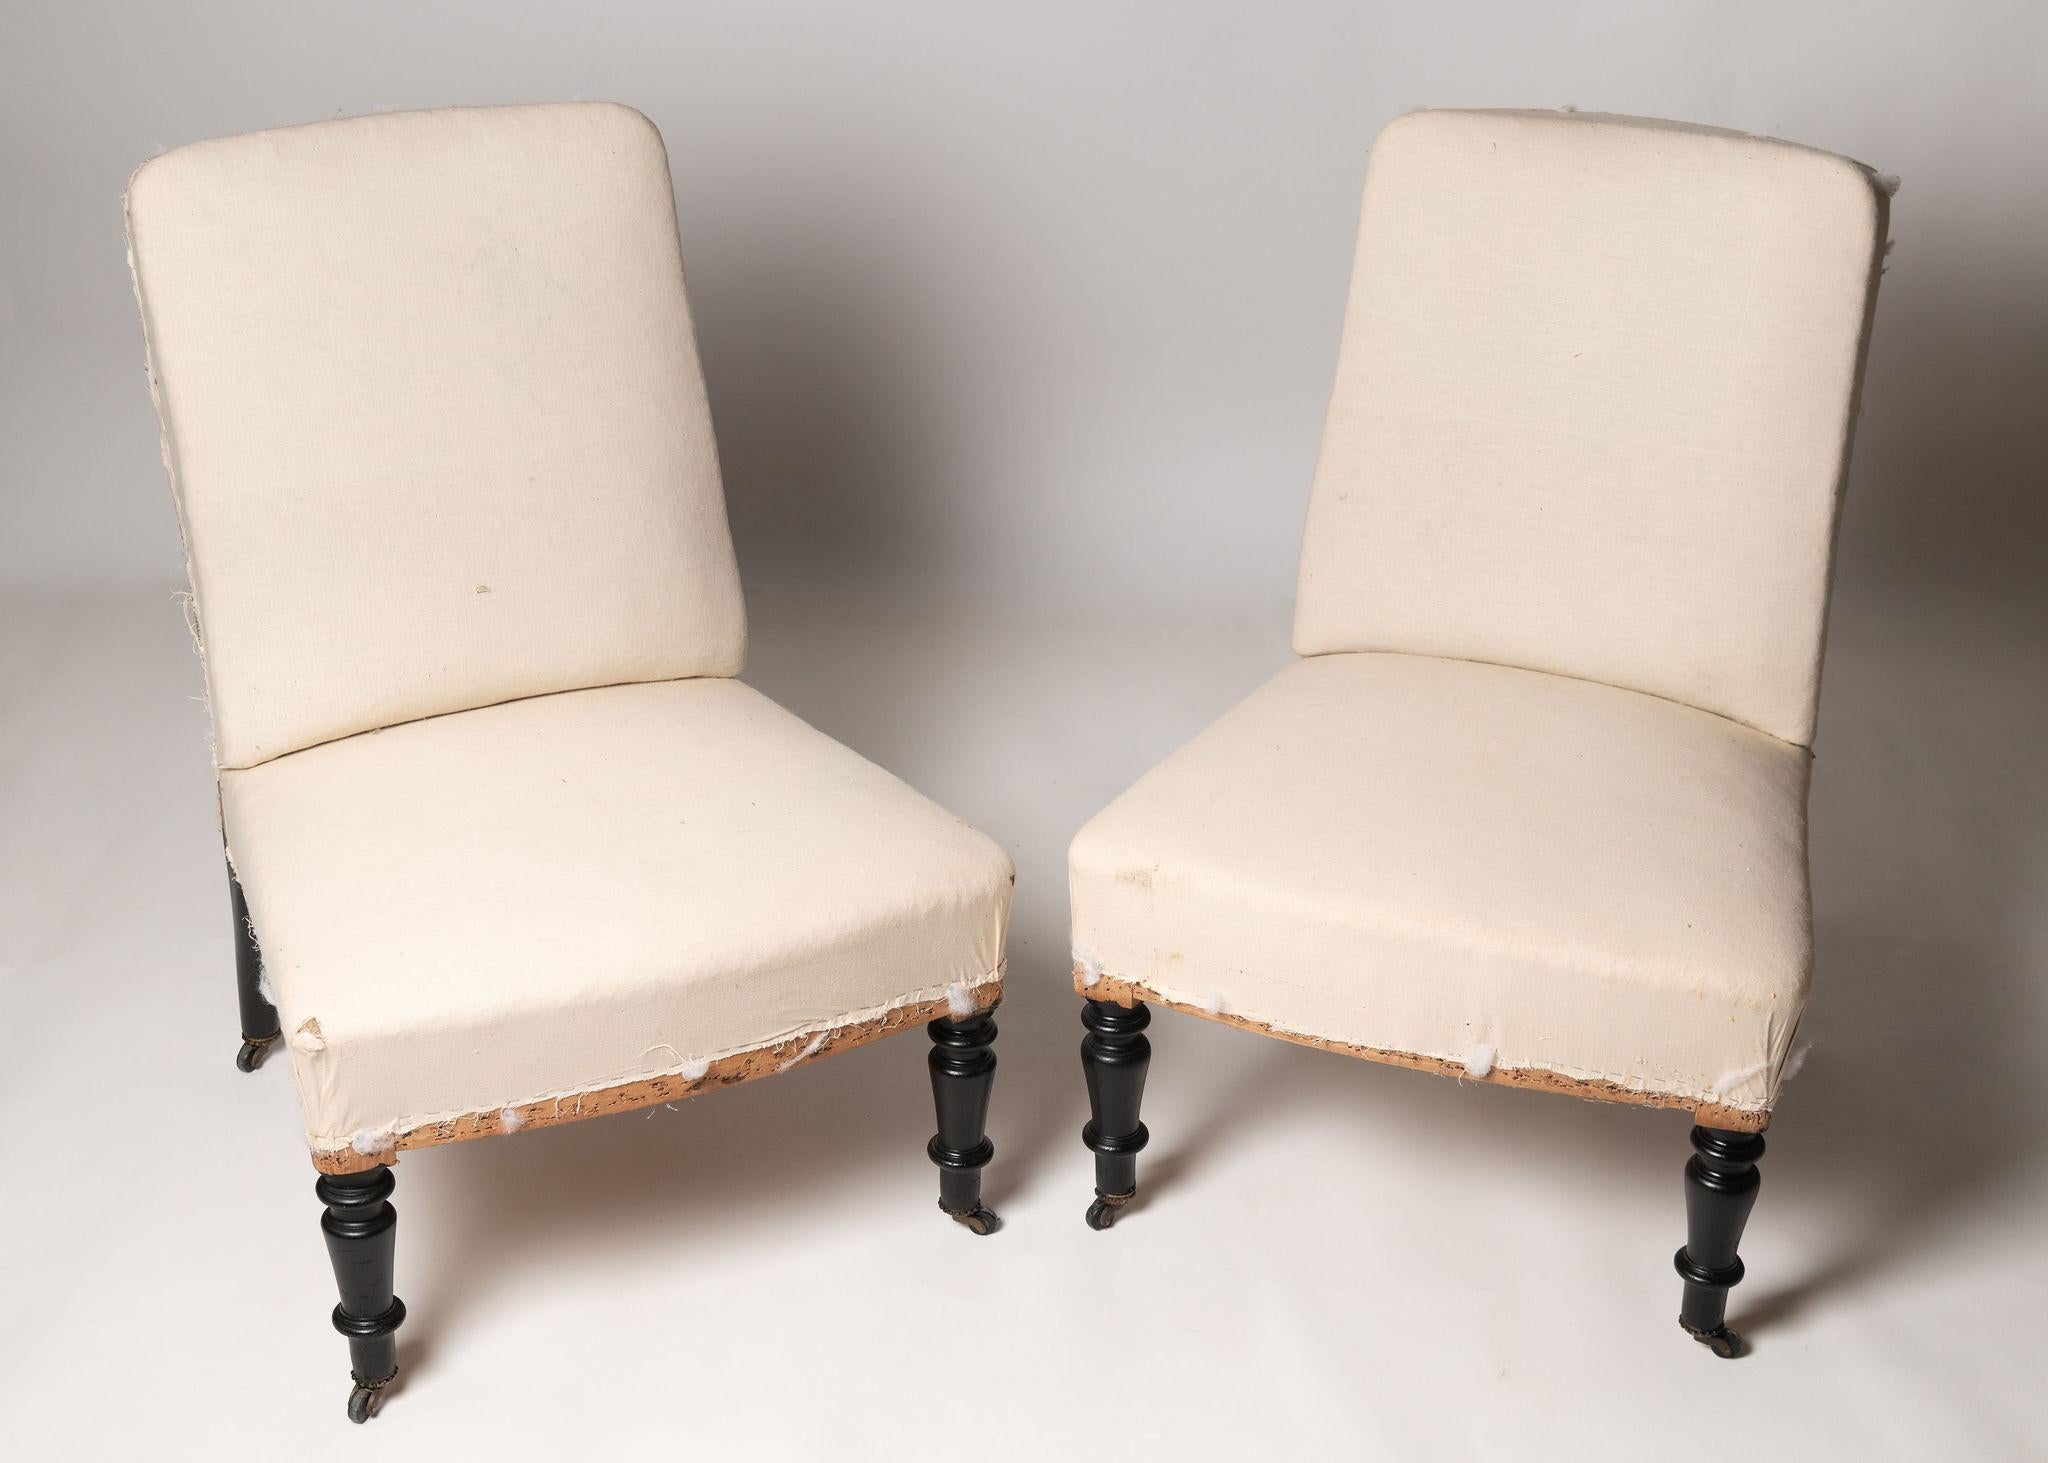 Antique French pair of Napoleon III slipper chairs, seat depth 16.5 inches. Ideal fireside, bedroom or occasional chairs. 19th Century. Ready for your upholstery. 